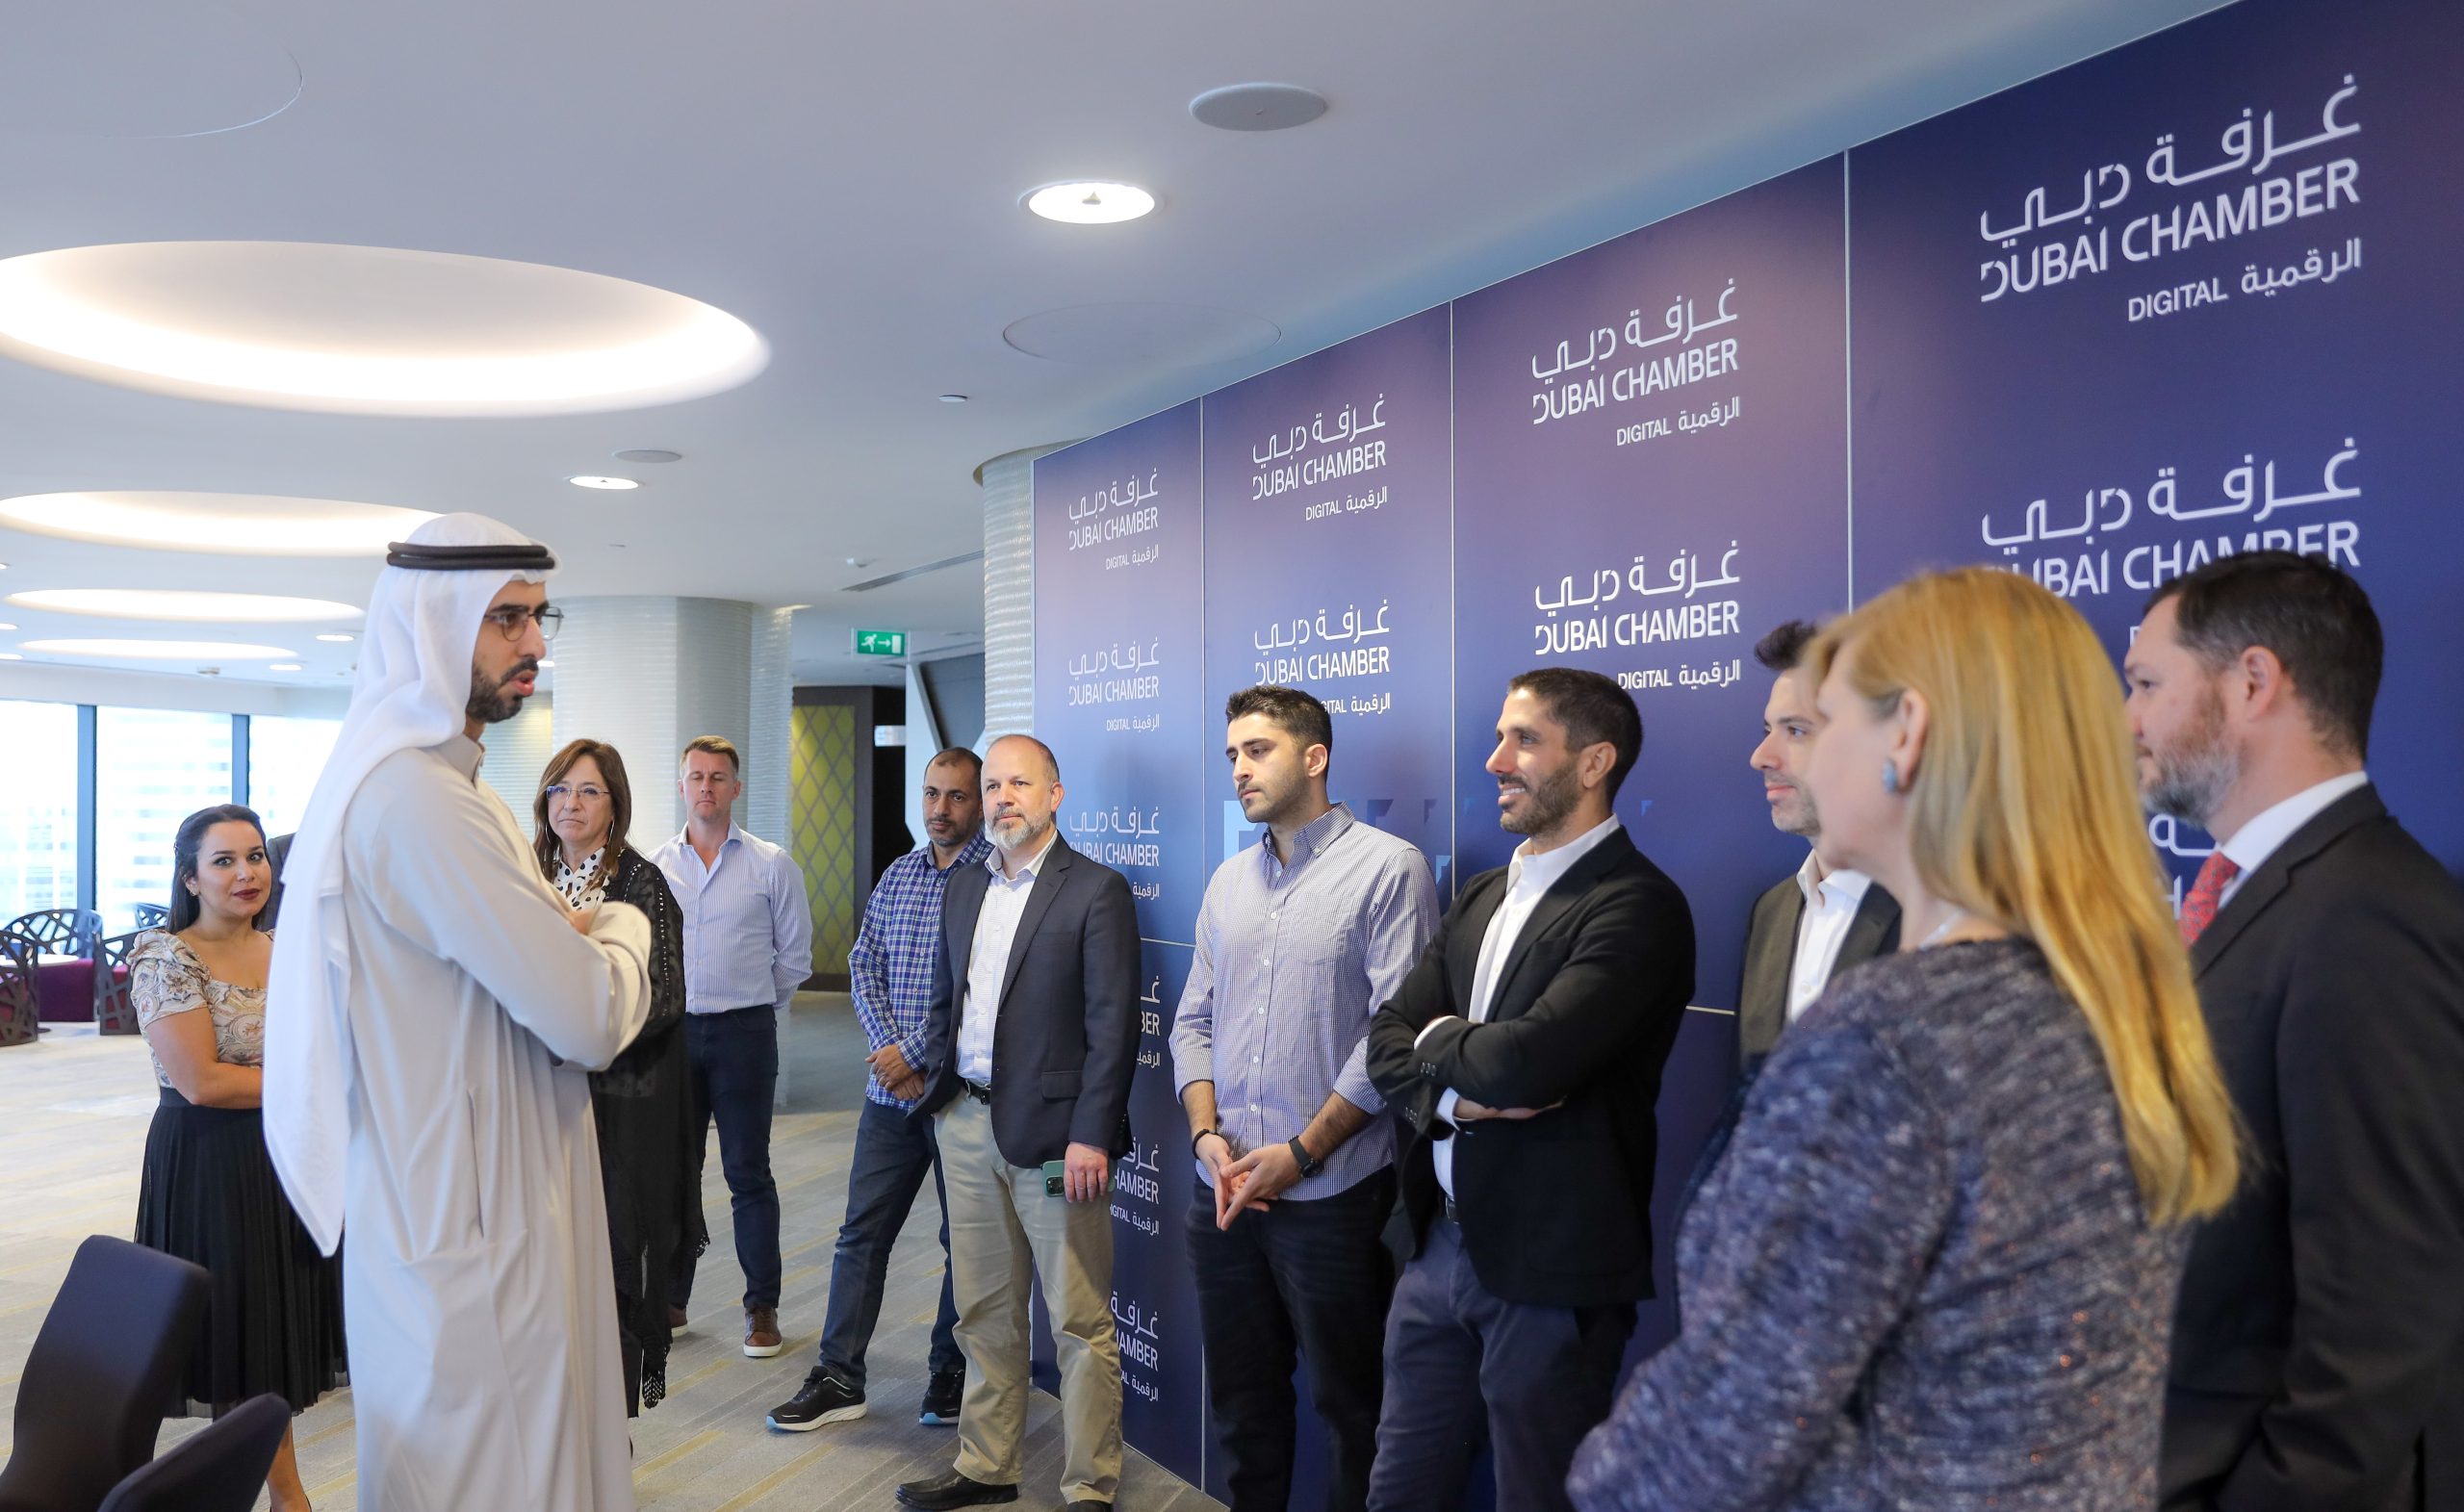 Dubai Chamber of Digital Economy Engages Industry Players in Shaping Future Gig Economy Landscape in Dubai